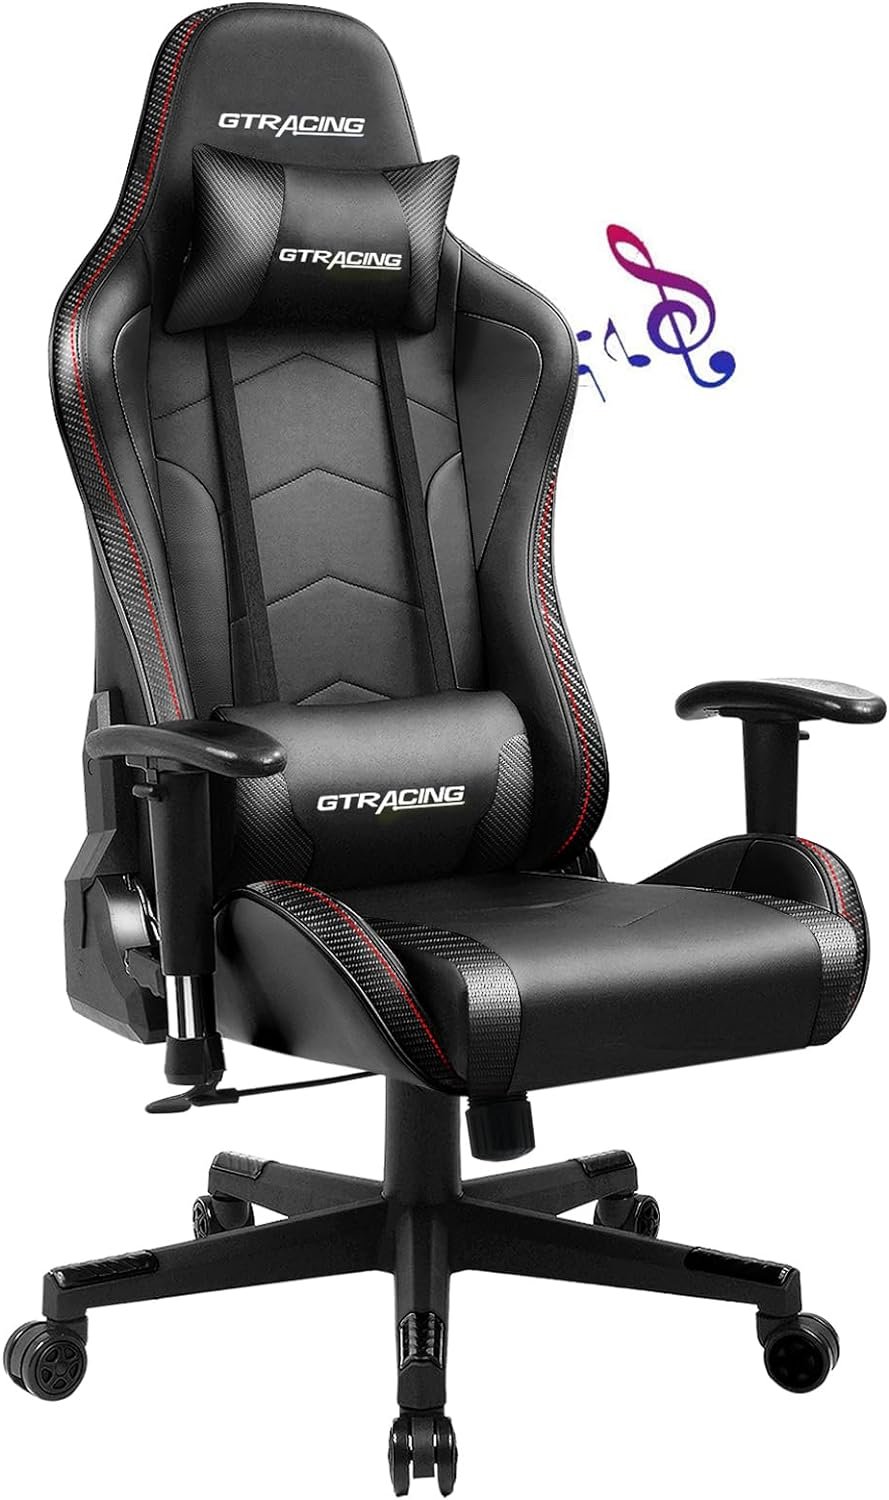 GTRACING Gaming Chair GT890M Review